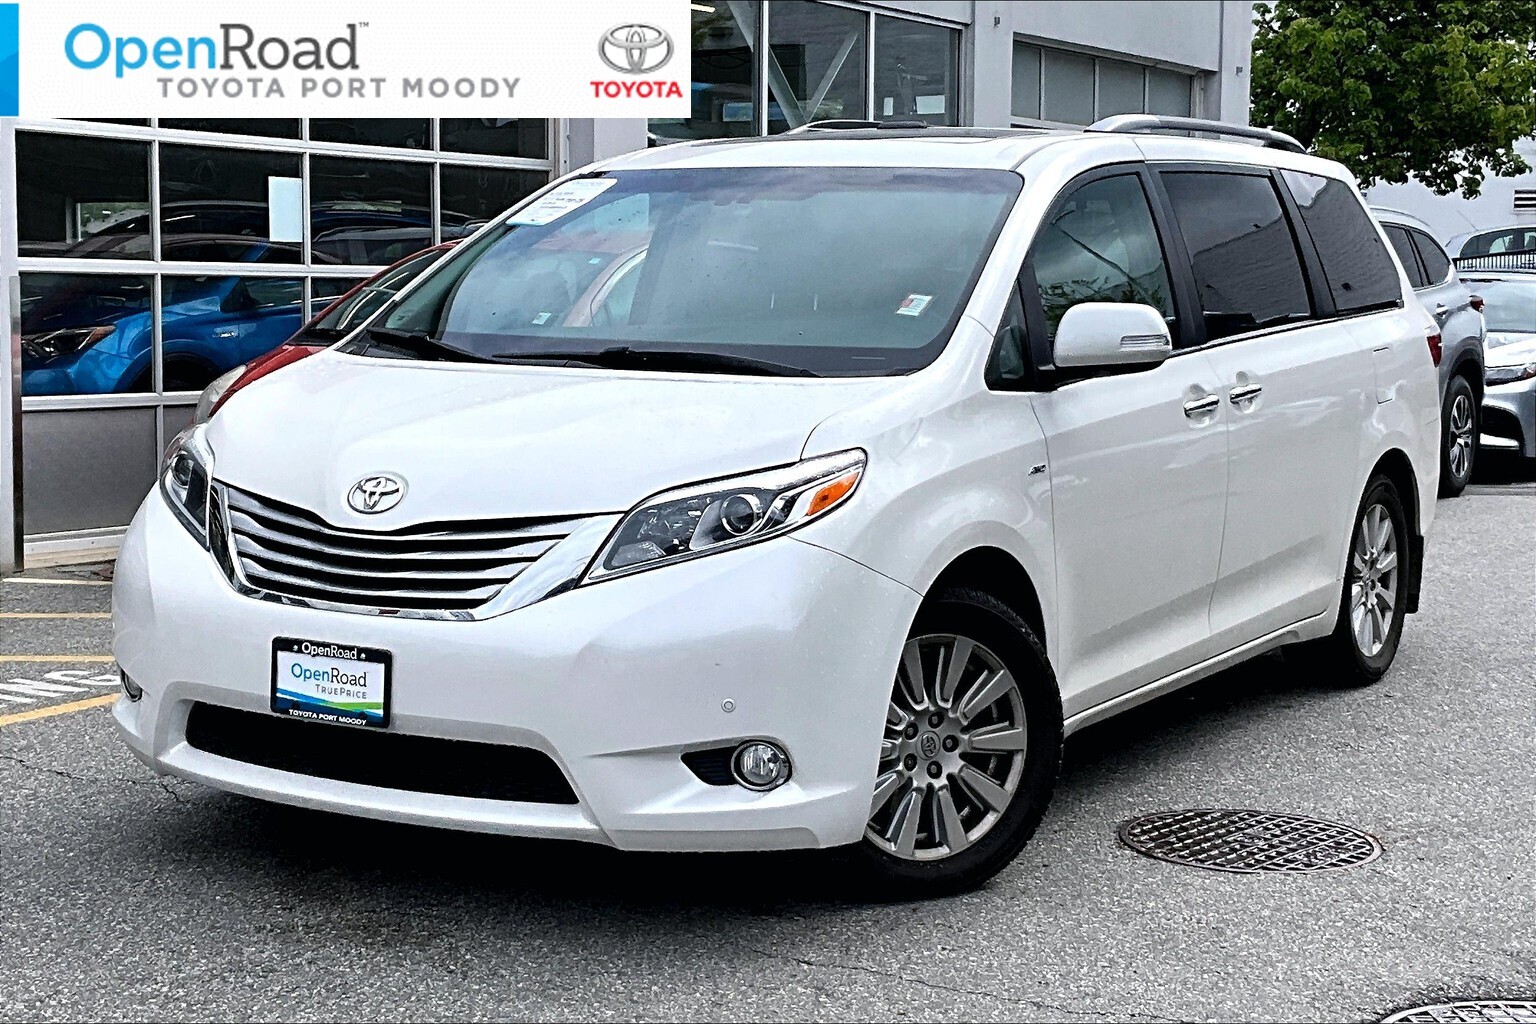 2017 Toyota Sienna XLE AWD 7-Passenger V6 |OpenRoad True Price |Local